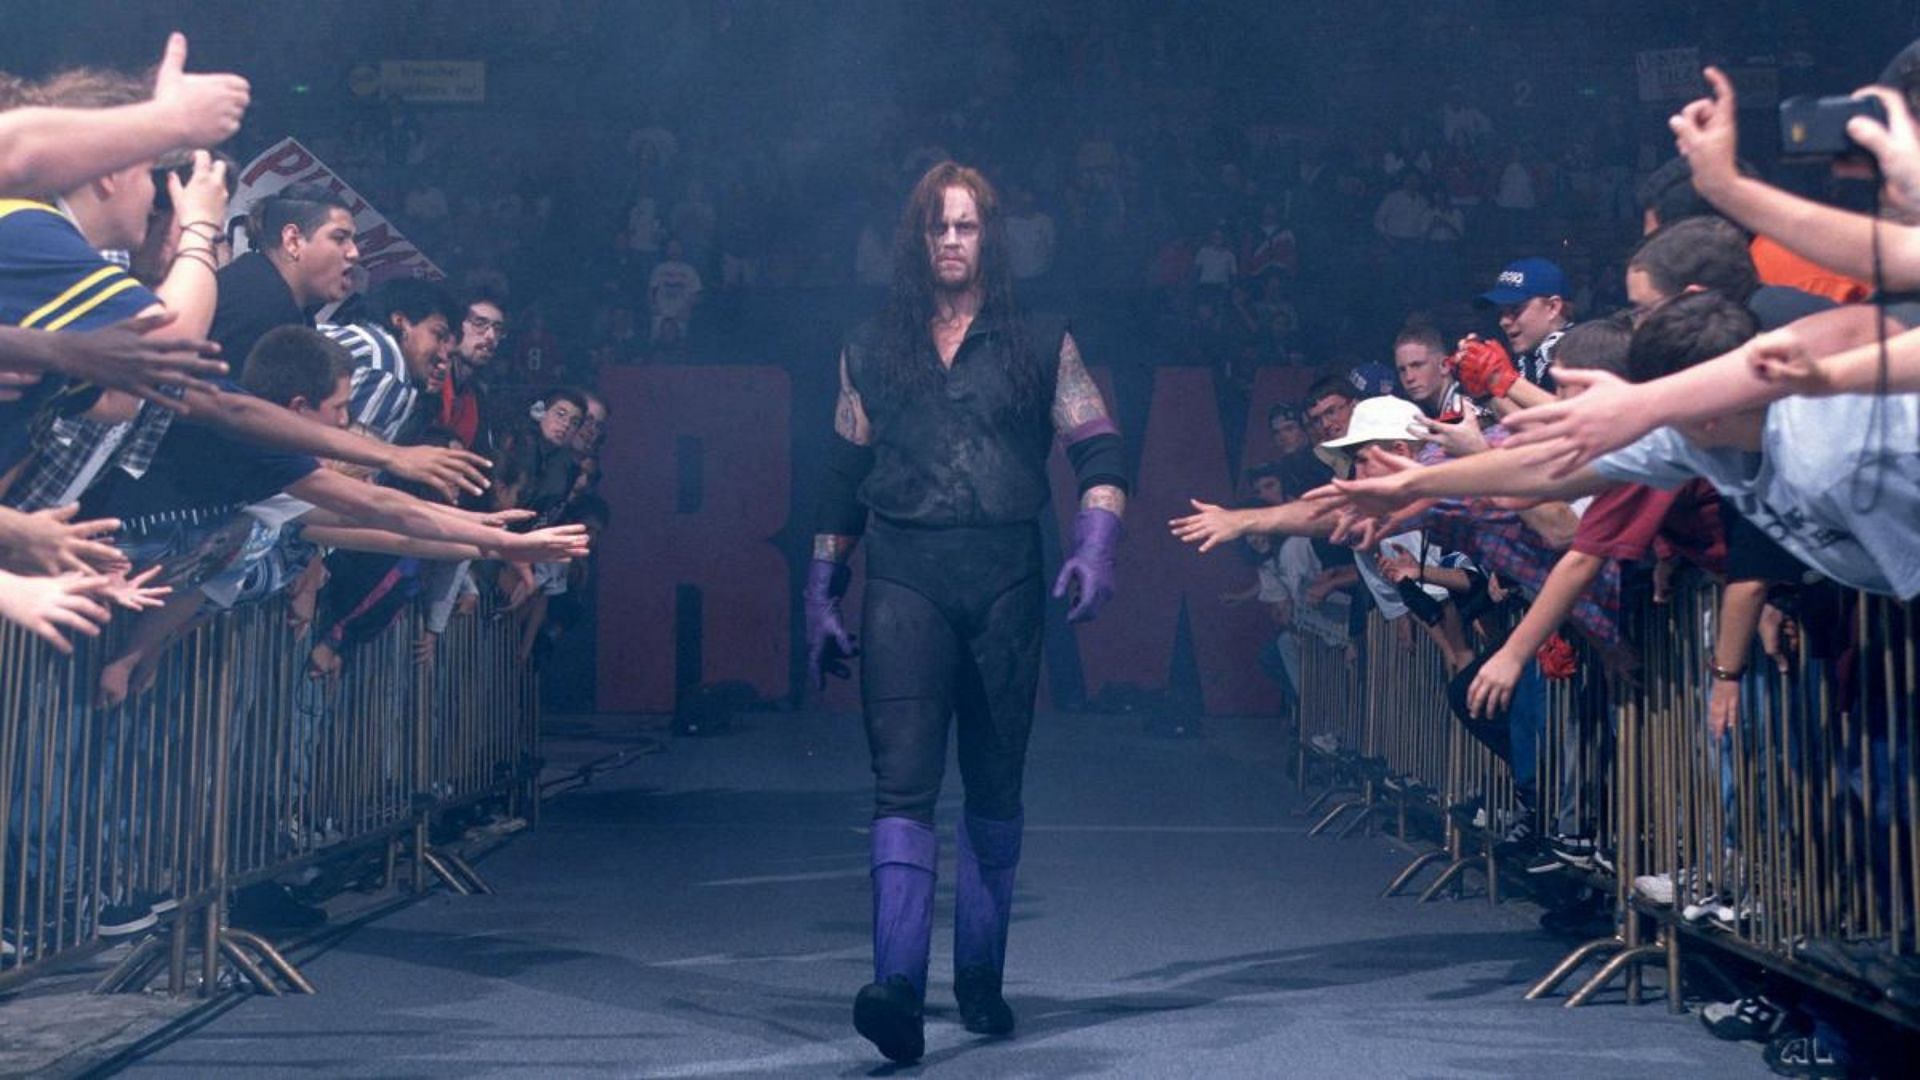 The Undertaker retired from in-ring competition in 2020